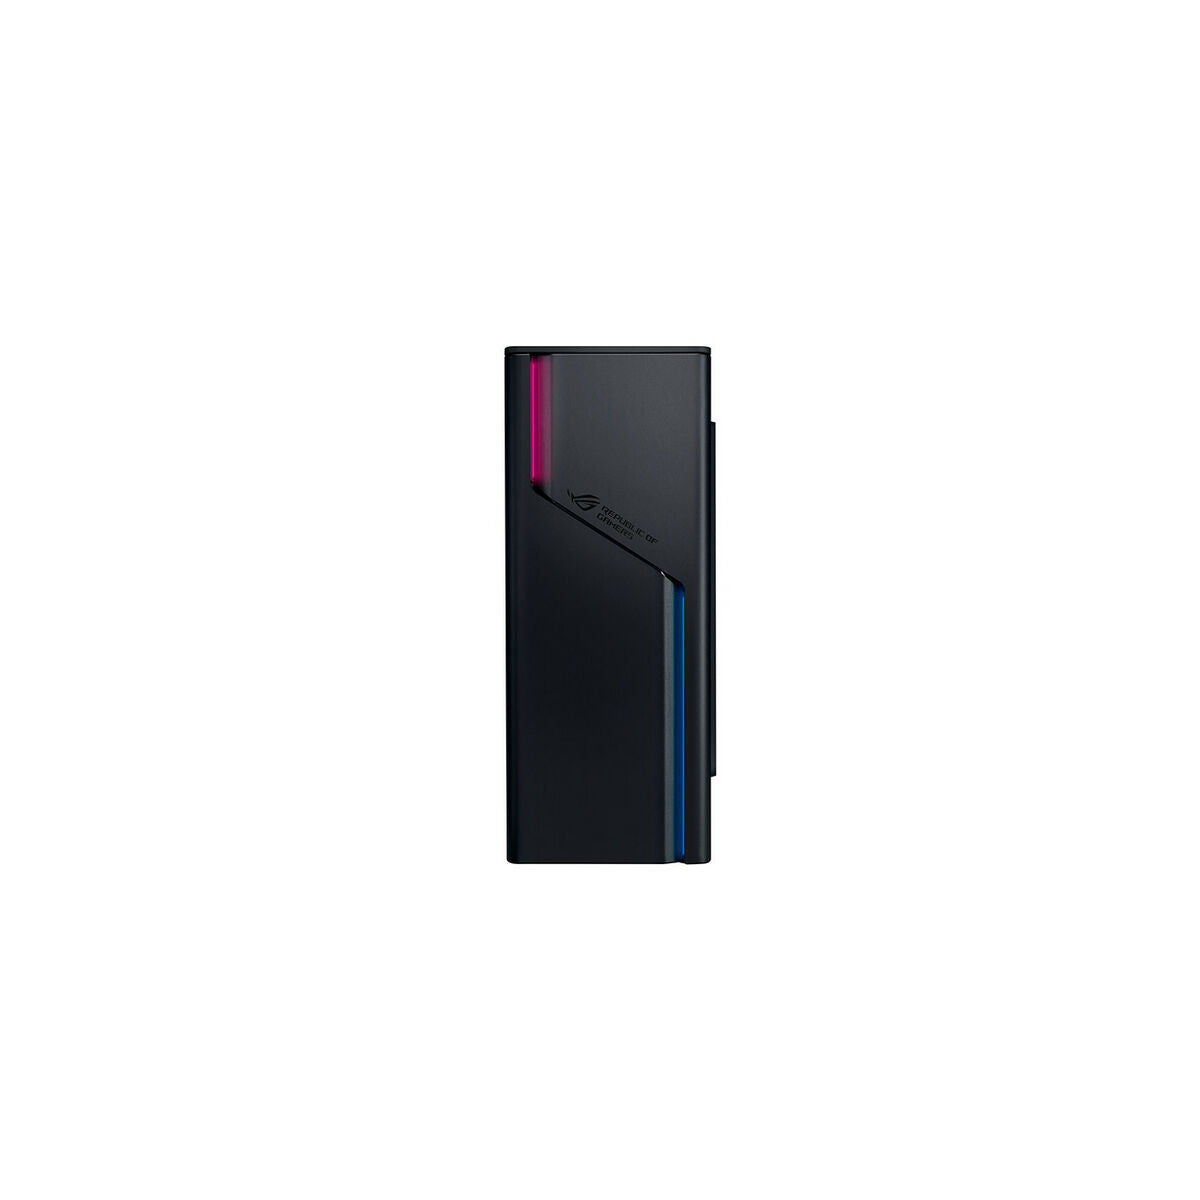 Desktop PC Asus G22CH-71470F0100 32 GB RAM 1 TB SSD, Asus, Computing, Desktops, desktop-pc-asus-g22ch-71470f0100-32-gb-ram-1-tb-ssd, Brand_Asus, category-reference-2609, category-reference-2791, category-reference-2792, category-reference-t-19685, category-reference-t-19903, category-reference-t-21381, computers / components, Condition_NEW, office, Price_+ 1000, Teleworking, RiotNook